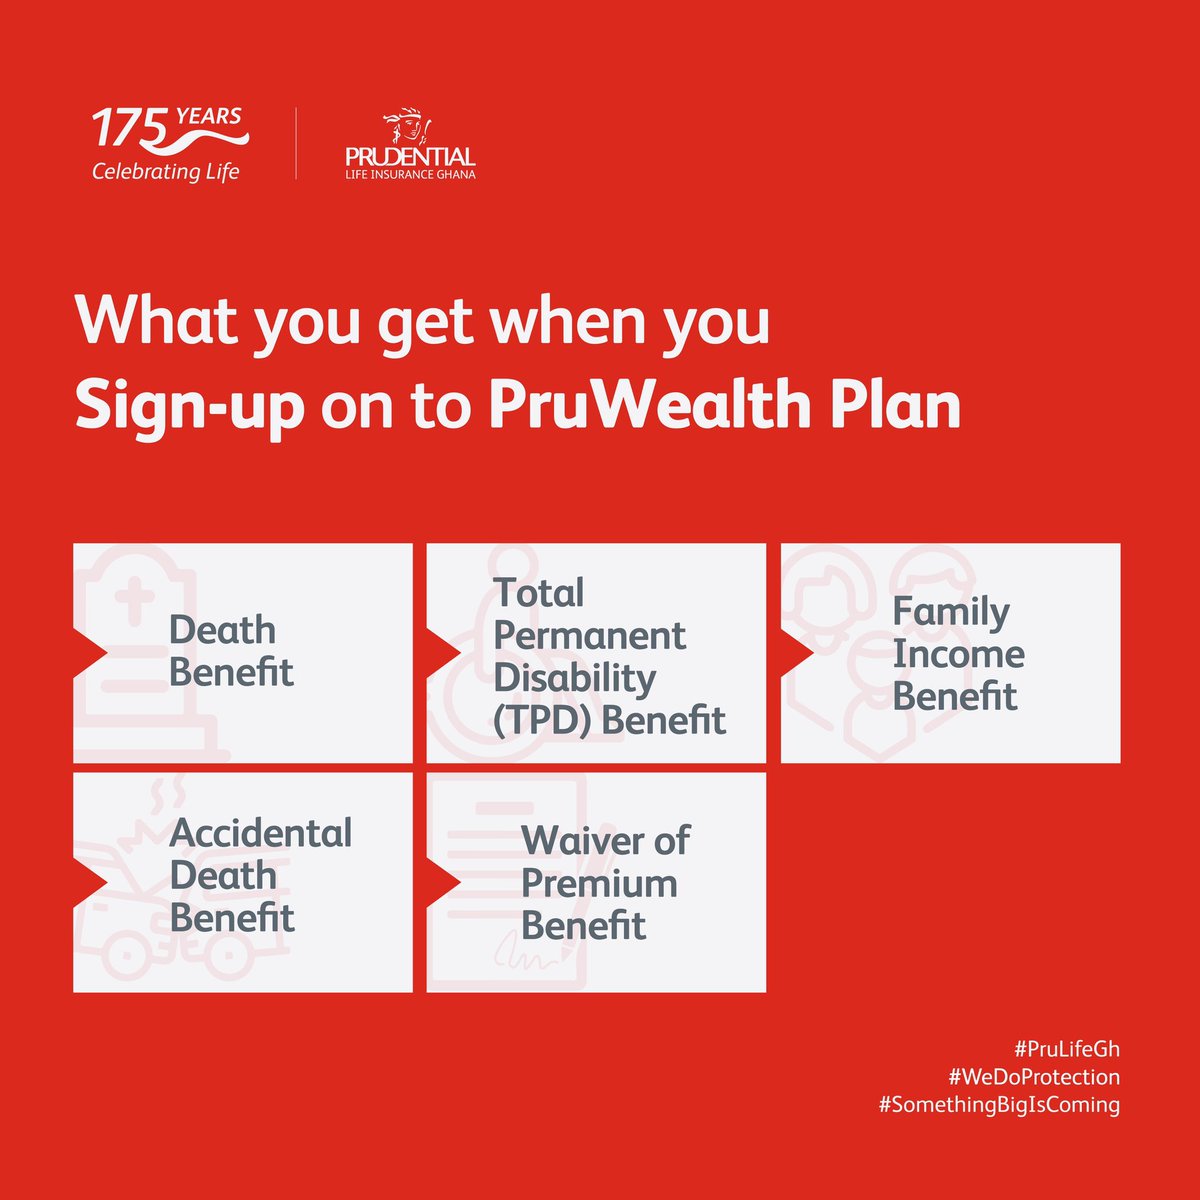 Signing up for the PruWealth Plan with Prudential Life gives you an endowment plan plus insurance cover benefits.
Want to know more? Call 0302208877 now.
#PruLifeGH
#WeDoProtection
#SomethingBigIsComing #featurebyprudentiallife